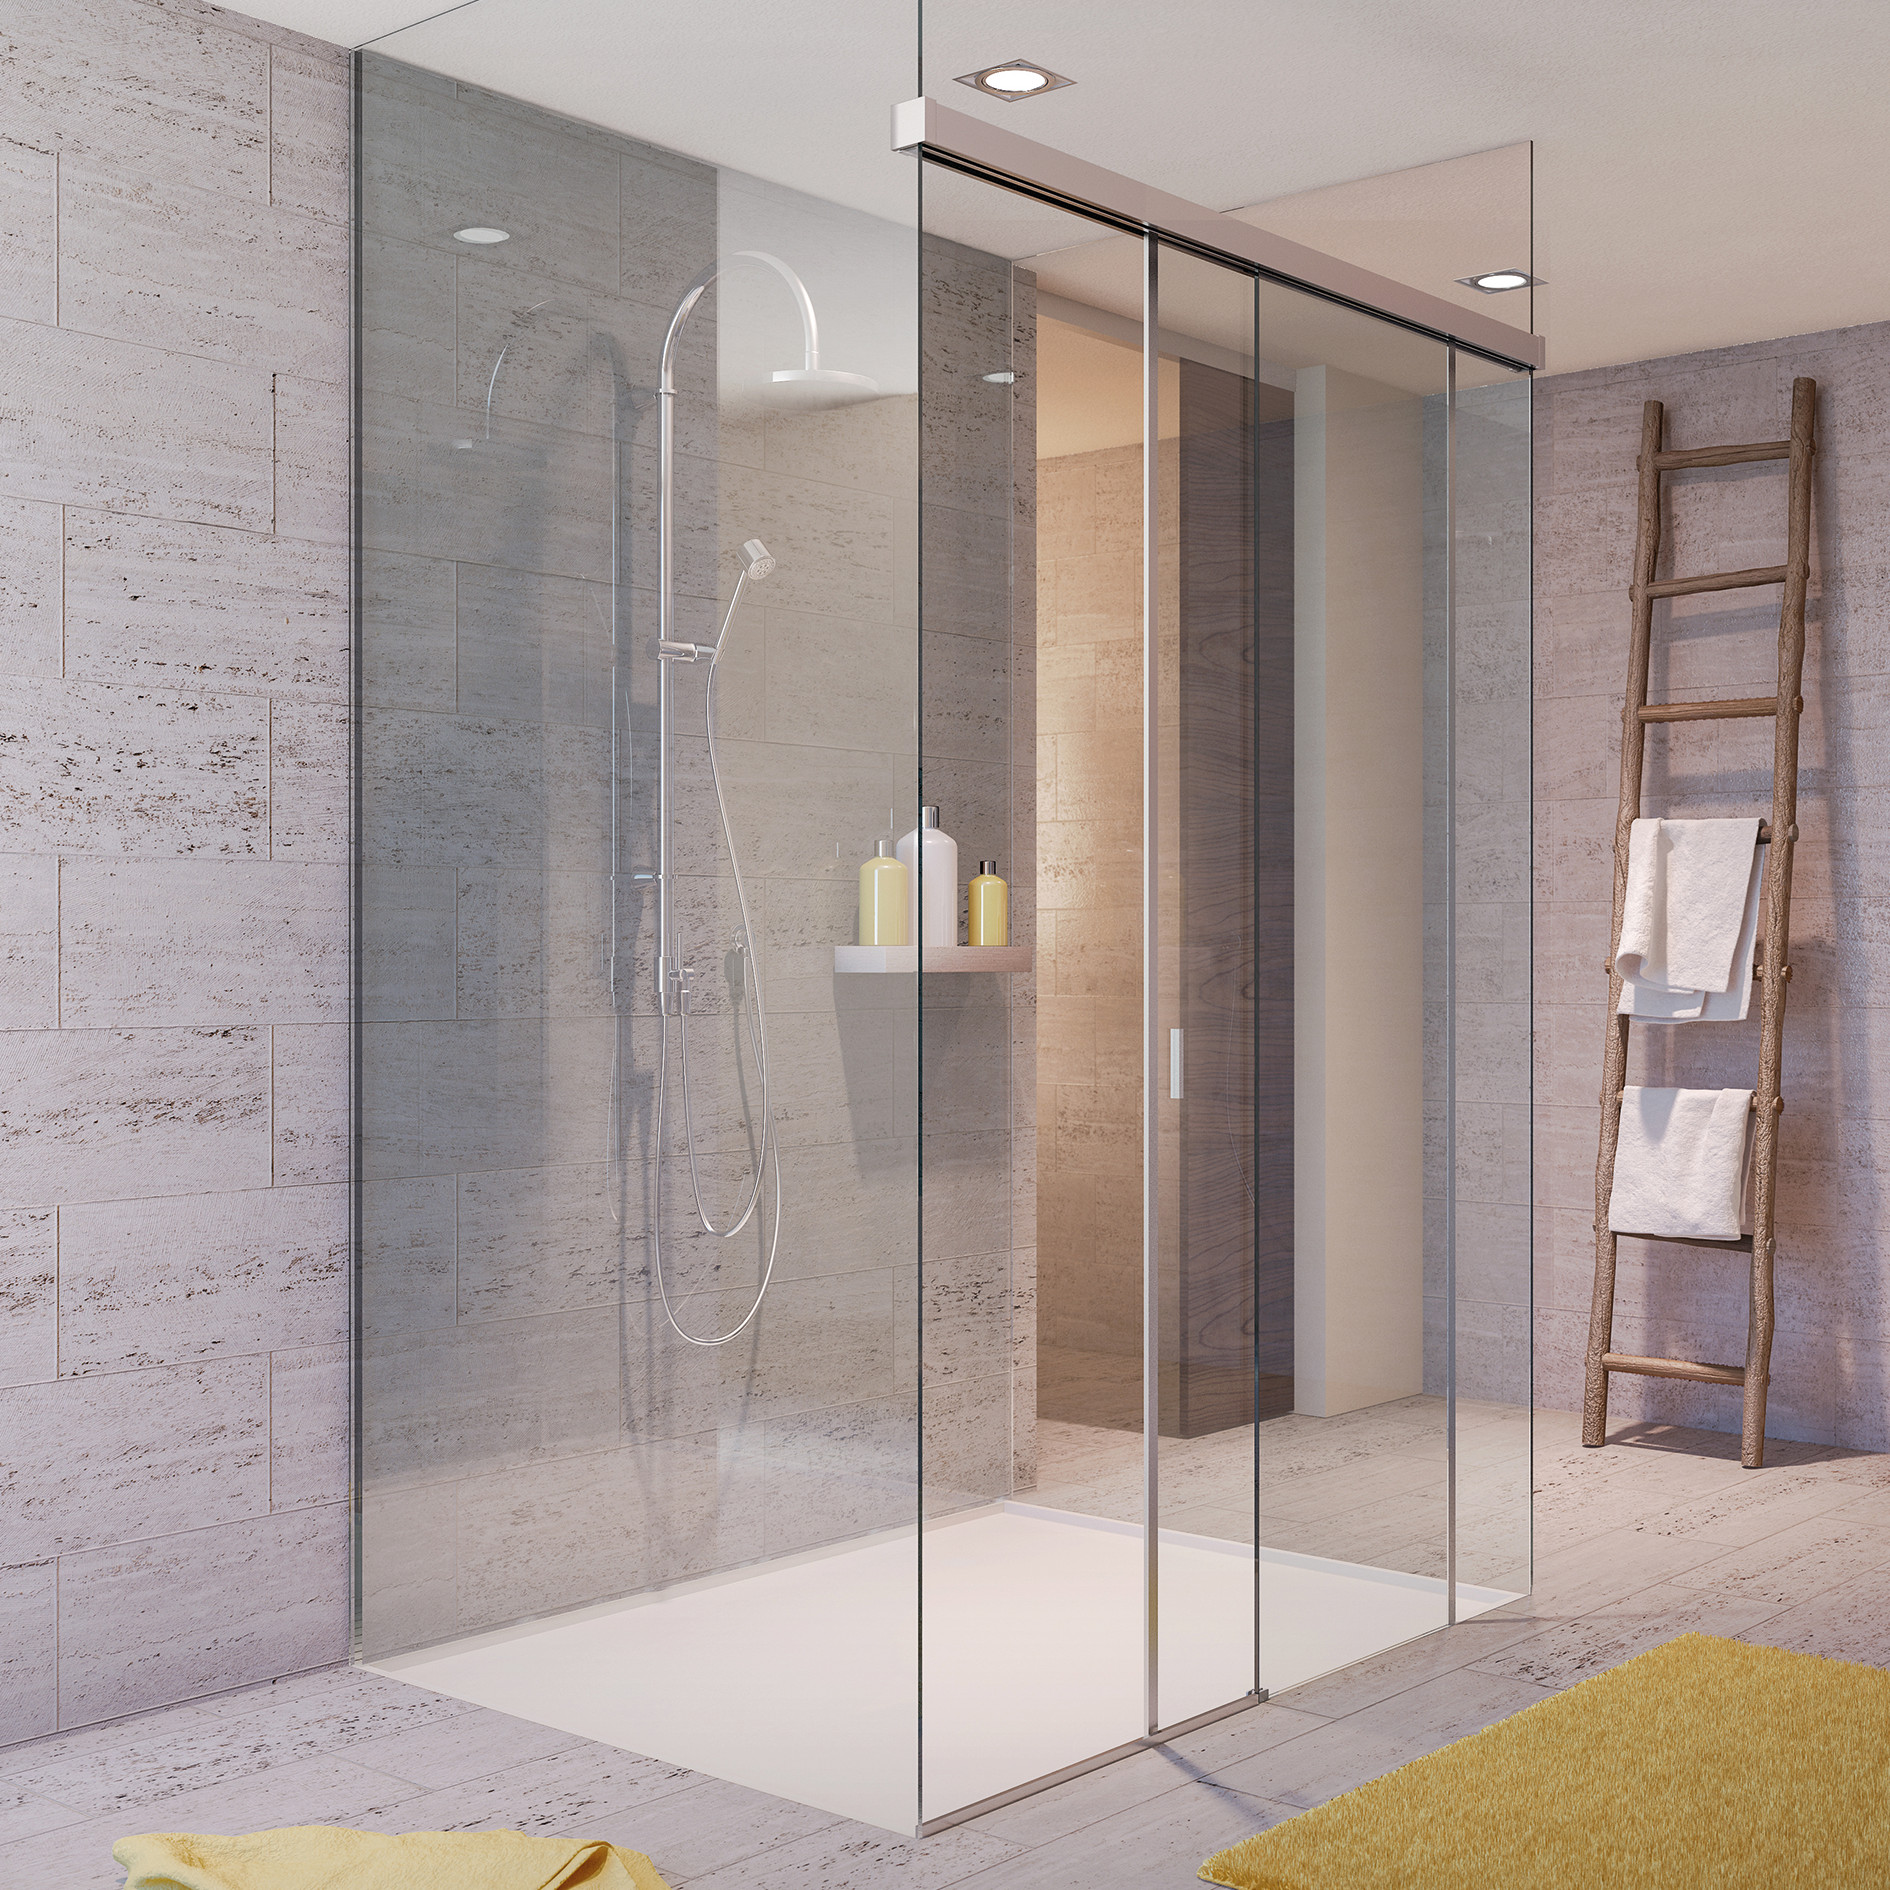 Sliding glass door in shower for disabled access